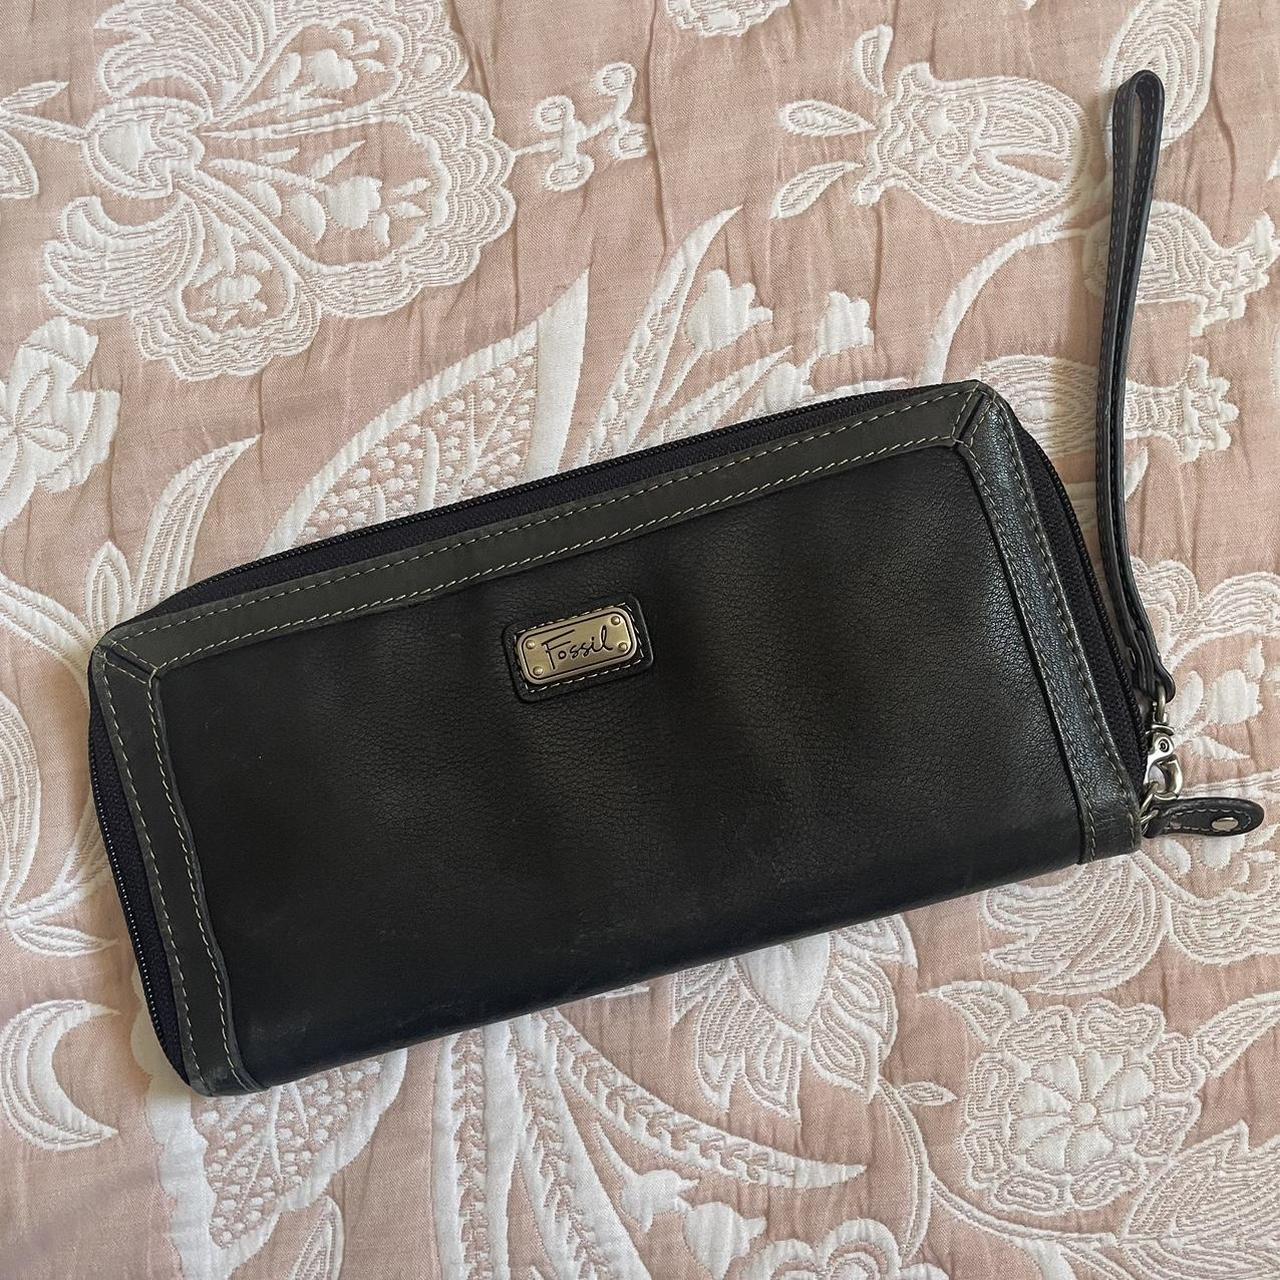 Replaced my 10 year old Fossil wallet for this Tory Burch beaut! :  r/handbags